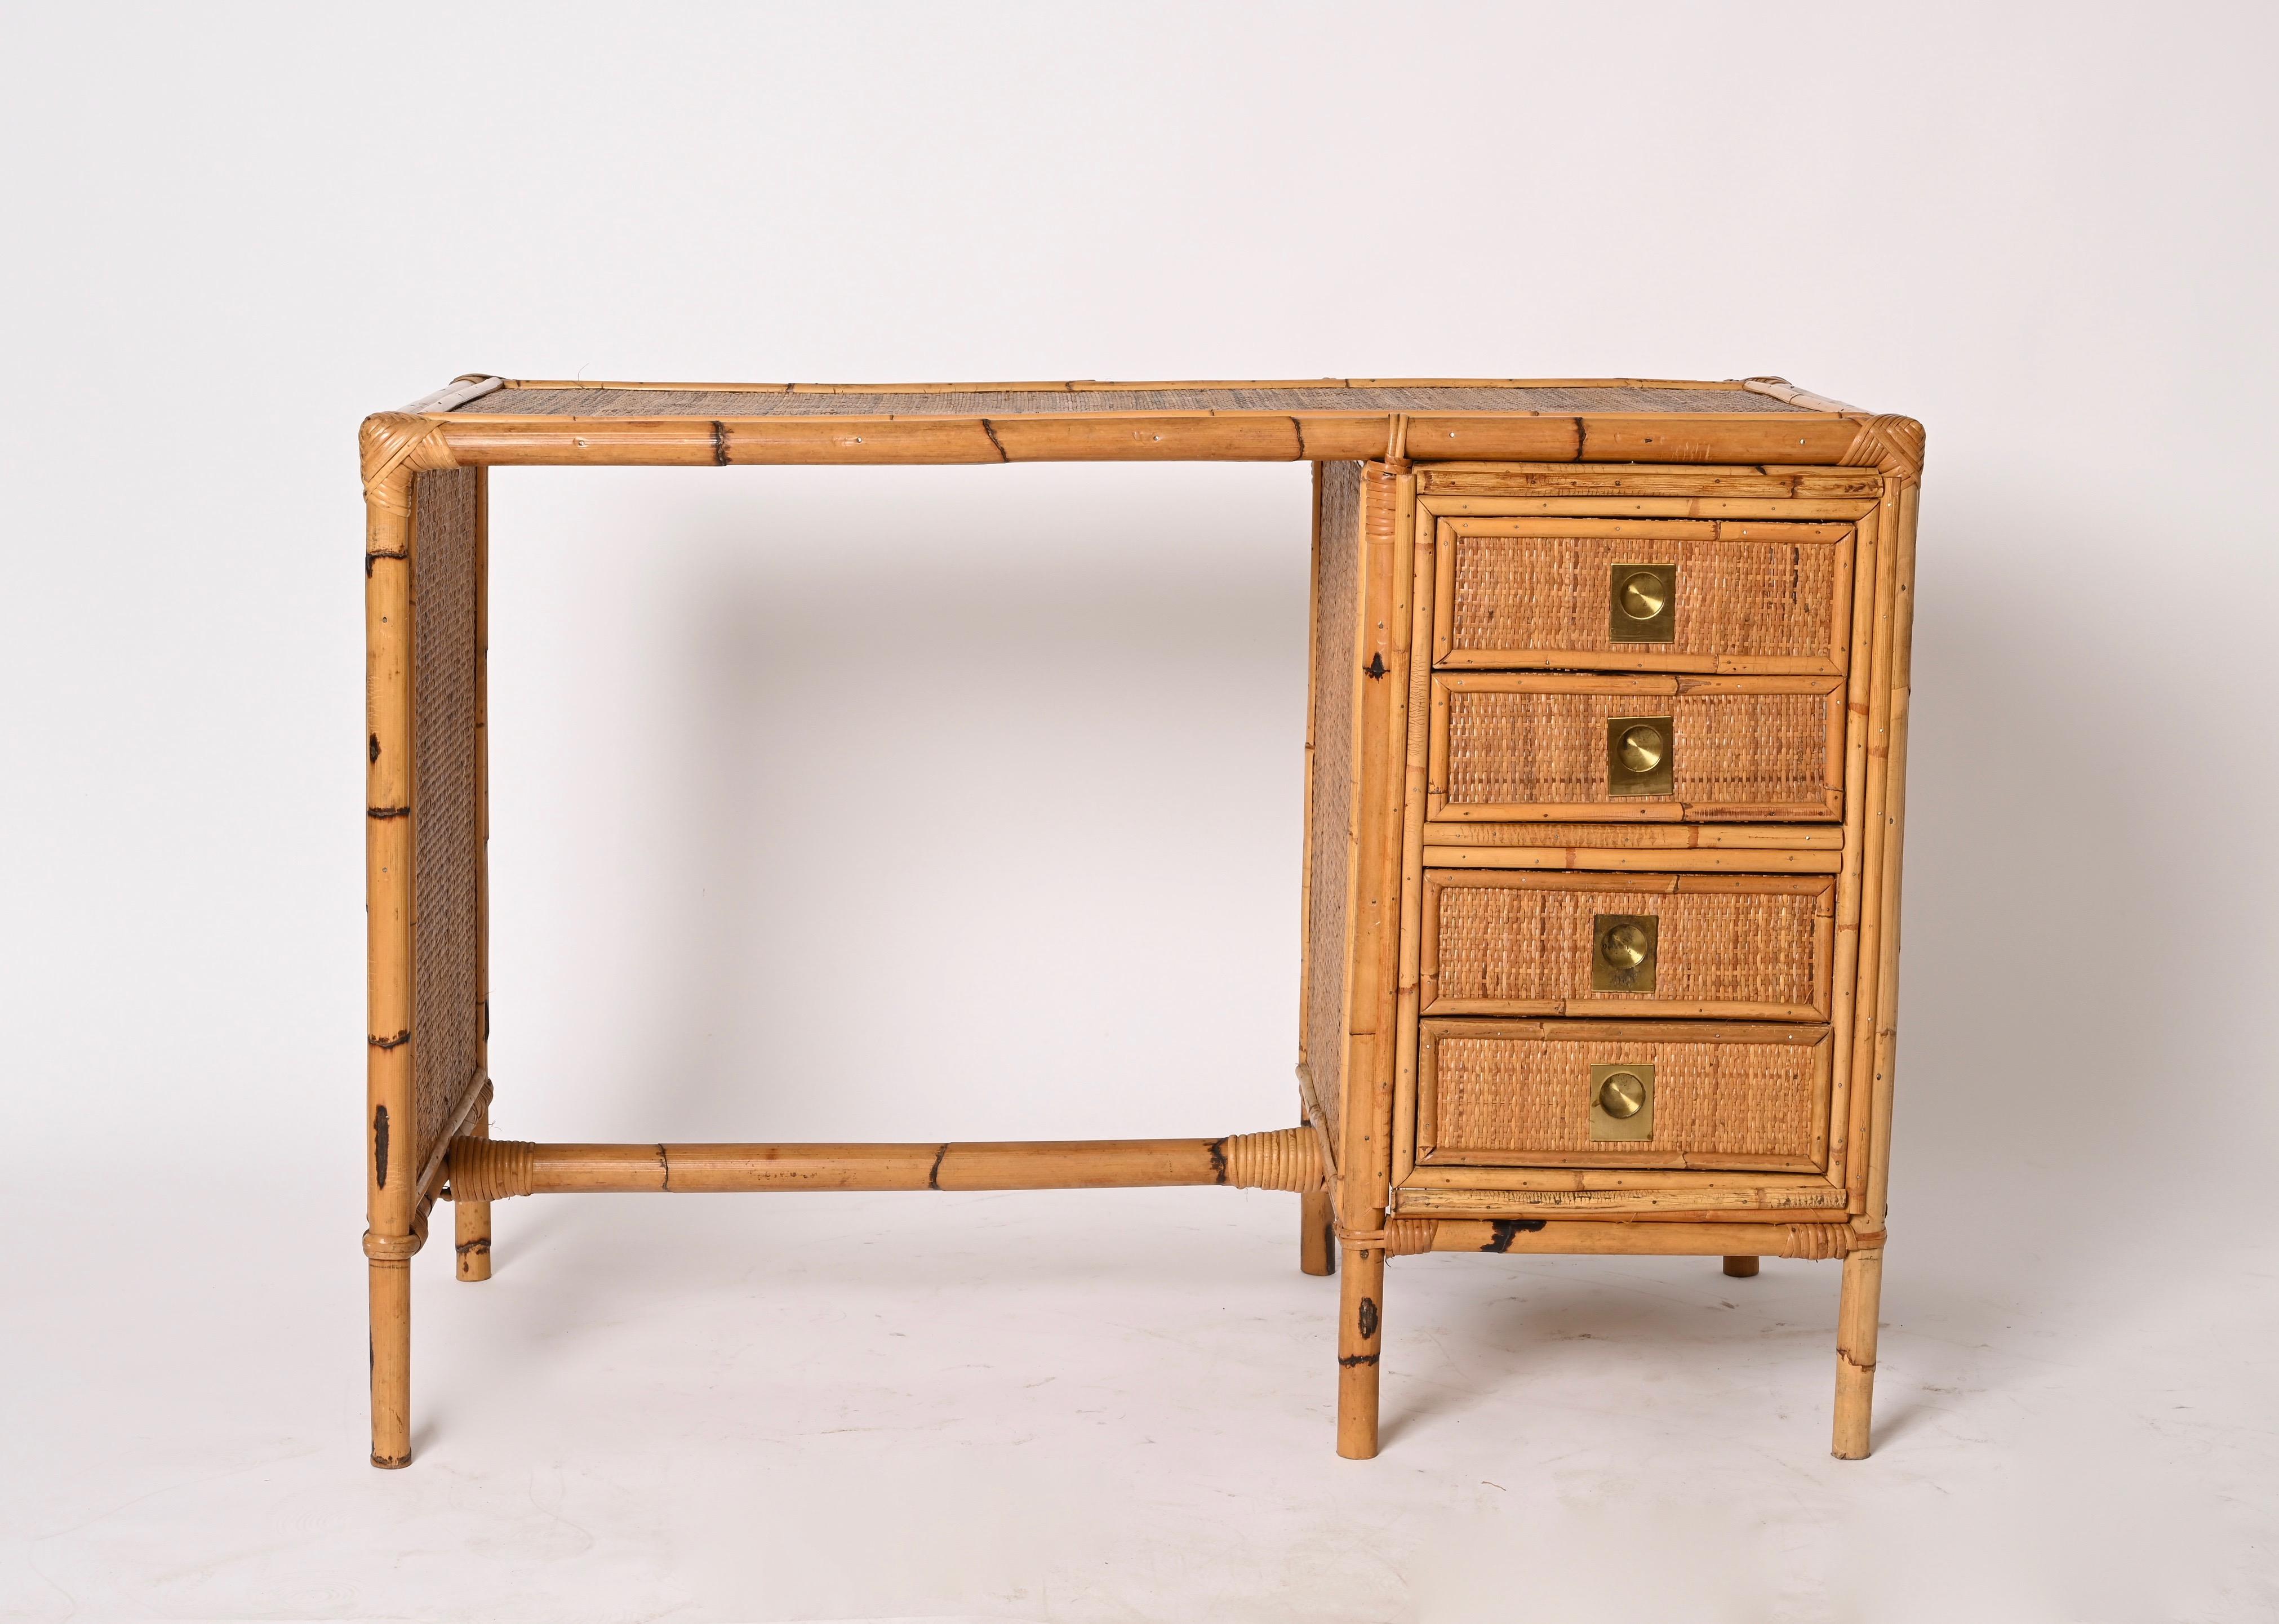 20th Century Mid-Century Bamboo and Wicker Italian Desk with Drawers, Italy, 1980s